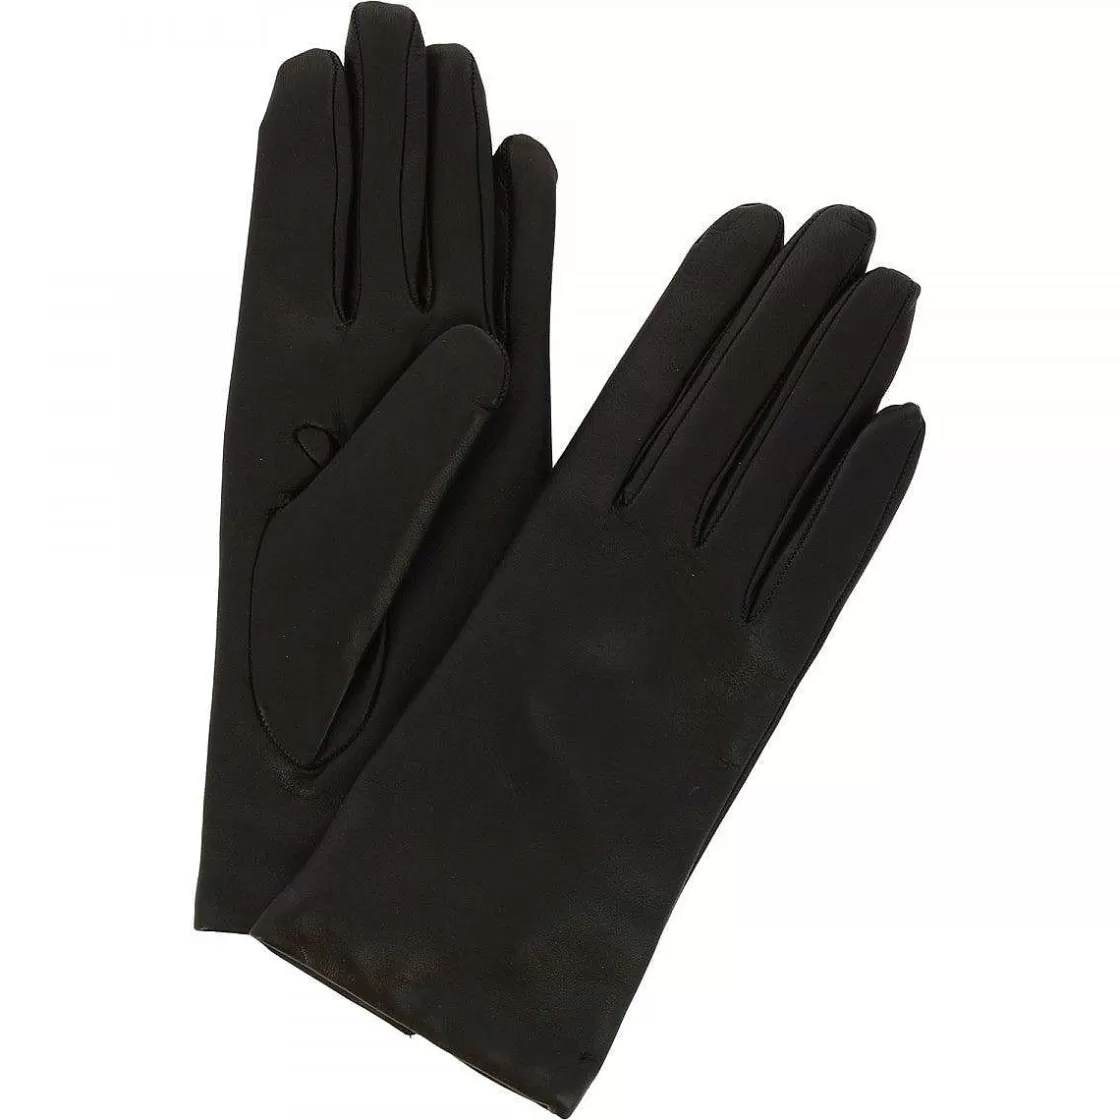 Leonardo Classic Women'S Gloves Handmade In Black Nappa Leather Lined In Cashmere Clearance